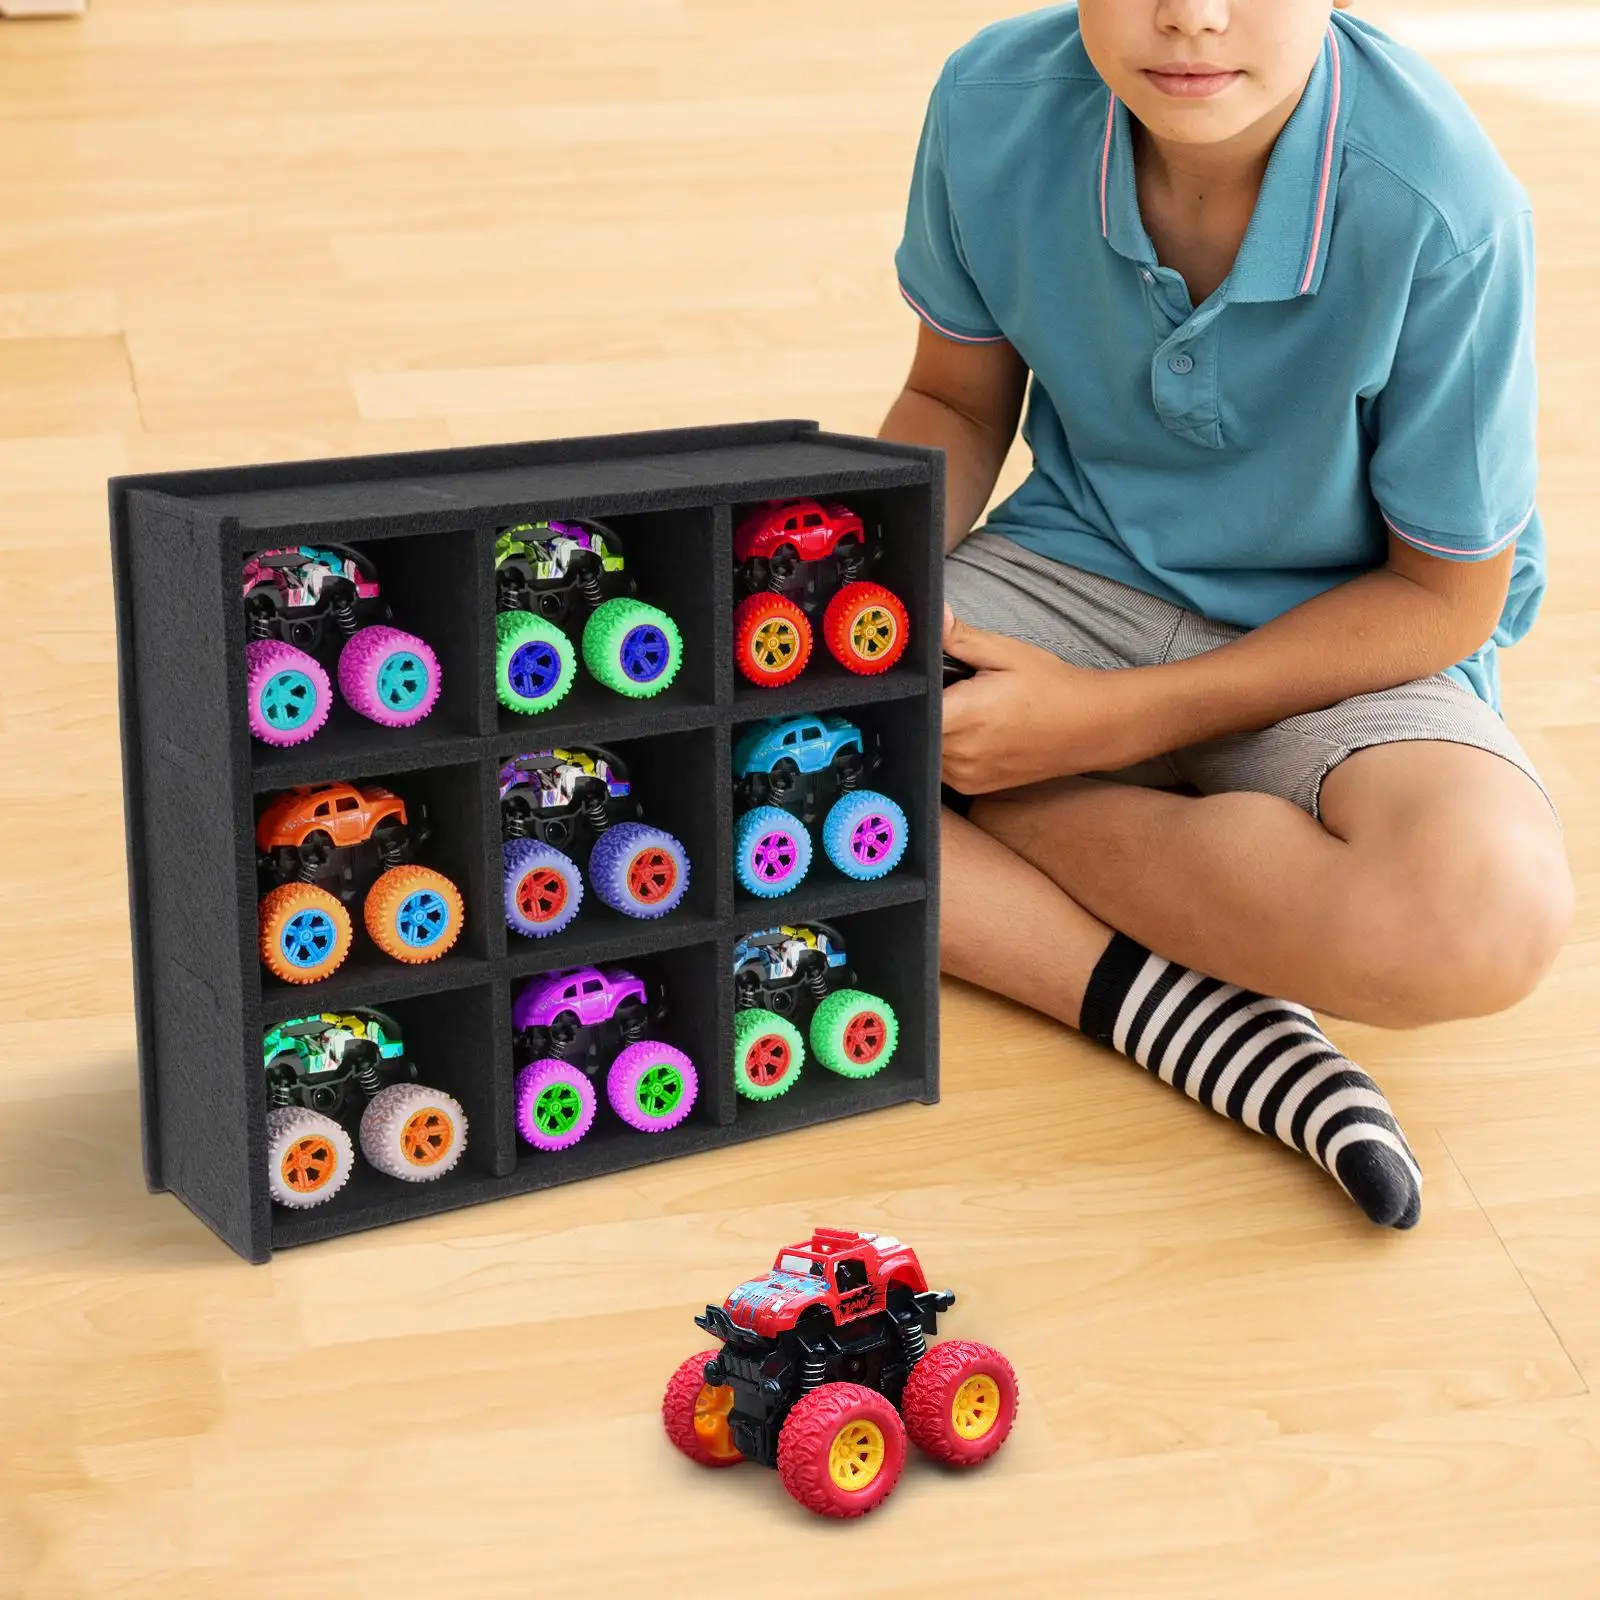 1:64 Scale Toy Trucks Door Wall Mounted Storage Case Black Color Felt Material for Displaying Convenient Accessory